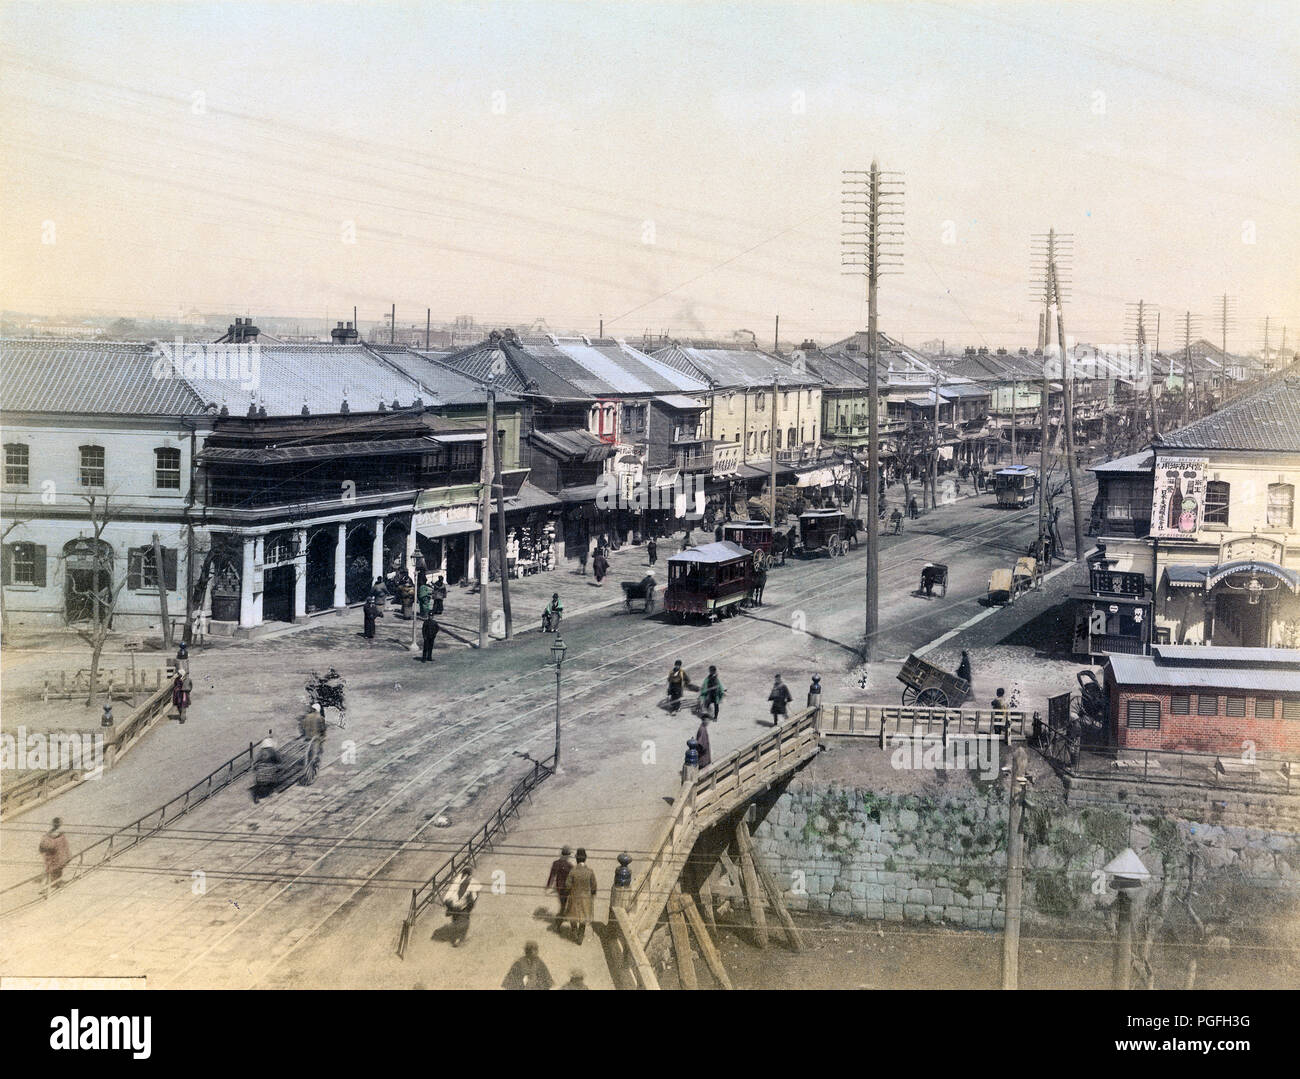 [ c. 1880s Japan - Shinbashi, Tokyo ] —   A view on the Shinbashi (also Shimbashi) bridge and Ginza avenue in Tokyo, sometime between 1882 and 1899. The wooden bridge over the Shiodomegawa (Shiodome River) was replaced with an iron bridge in April 1899.  19th century vintage albumen photograph. Stock Photo